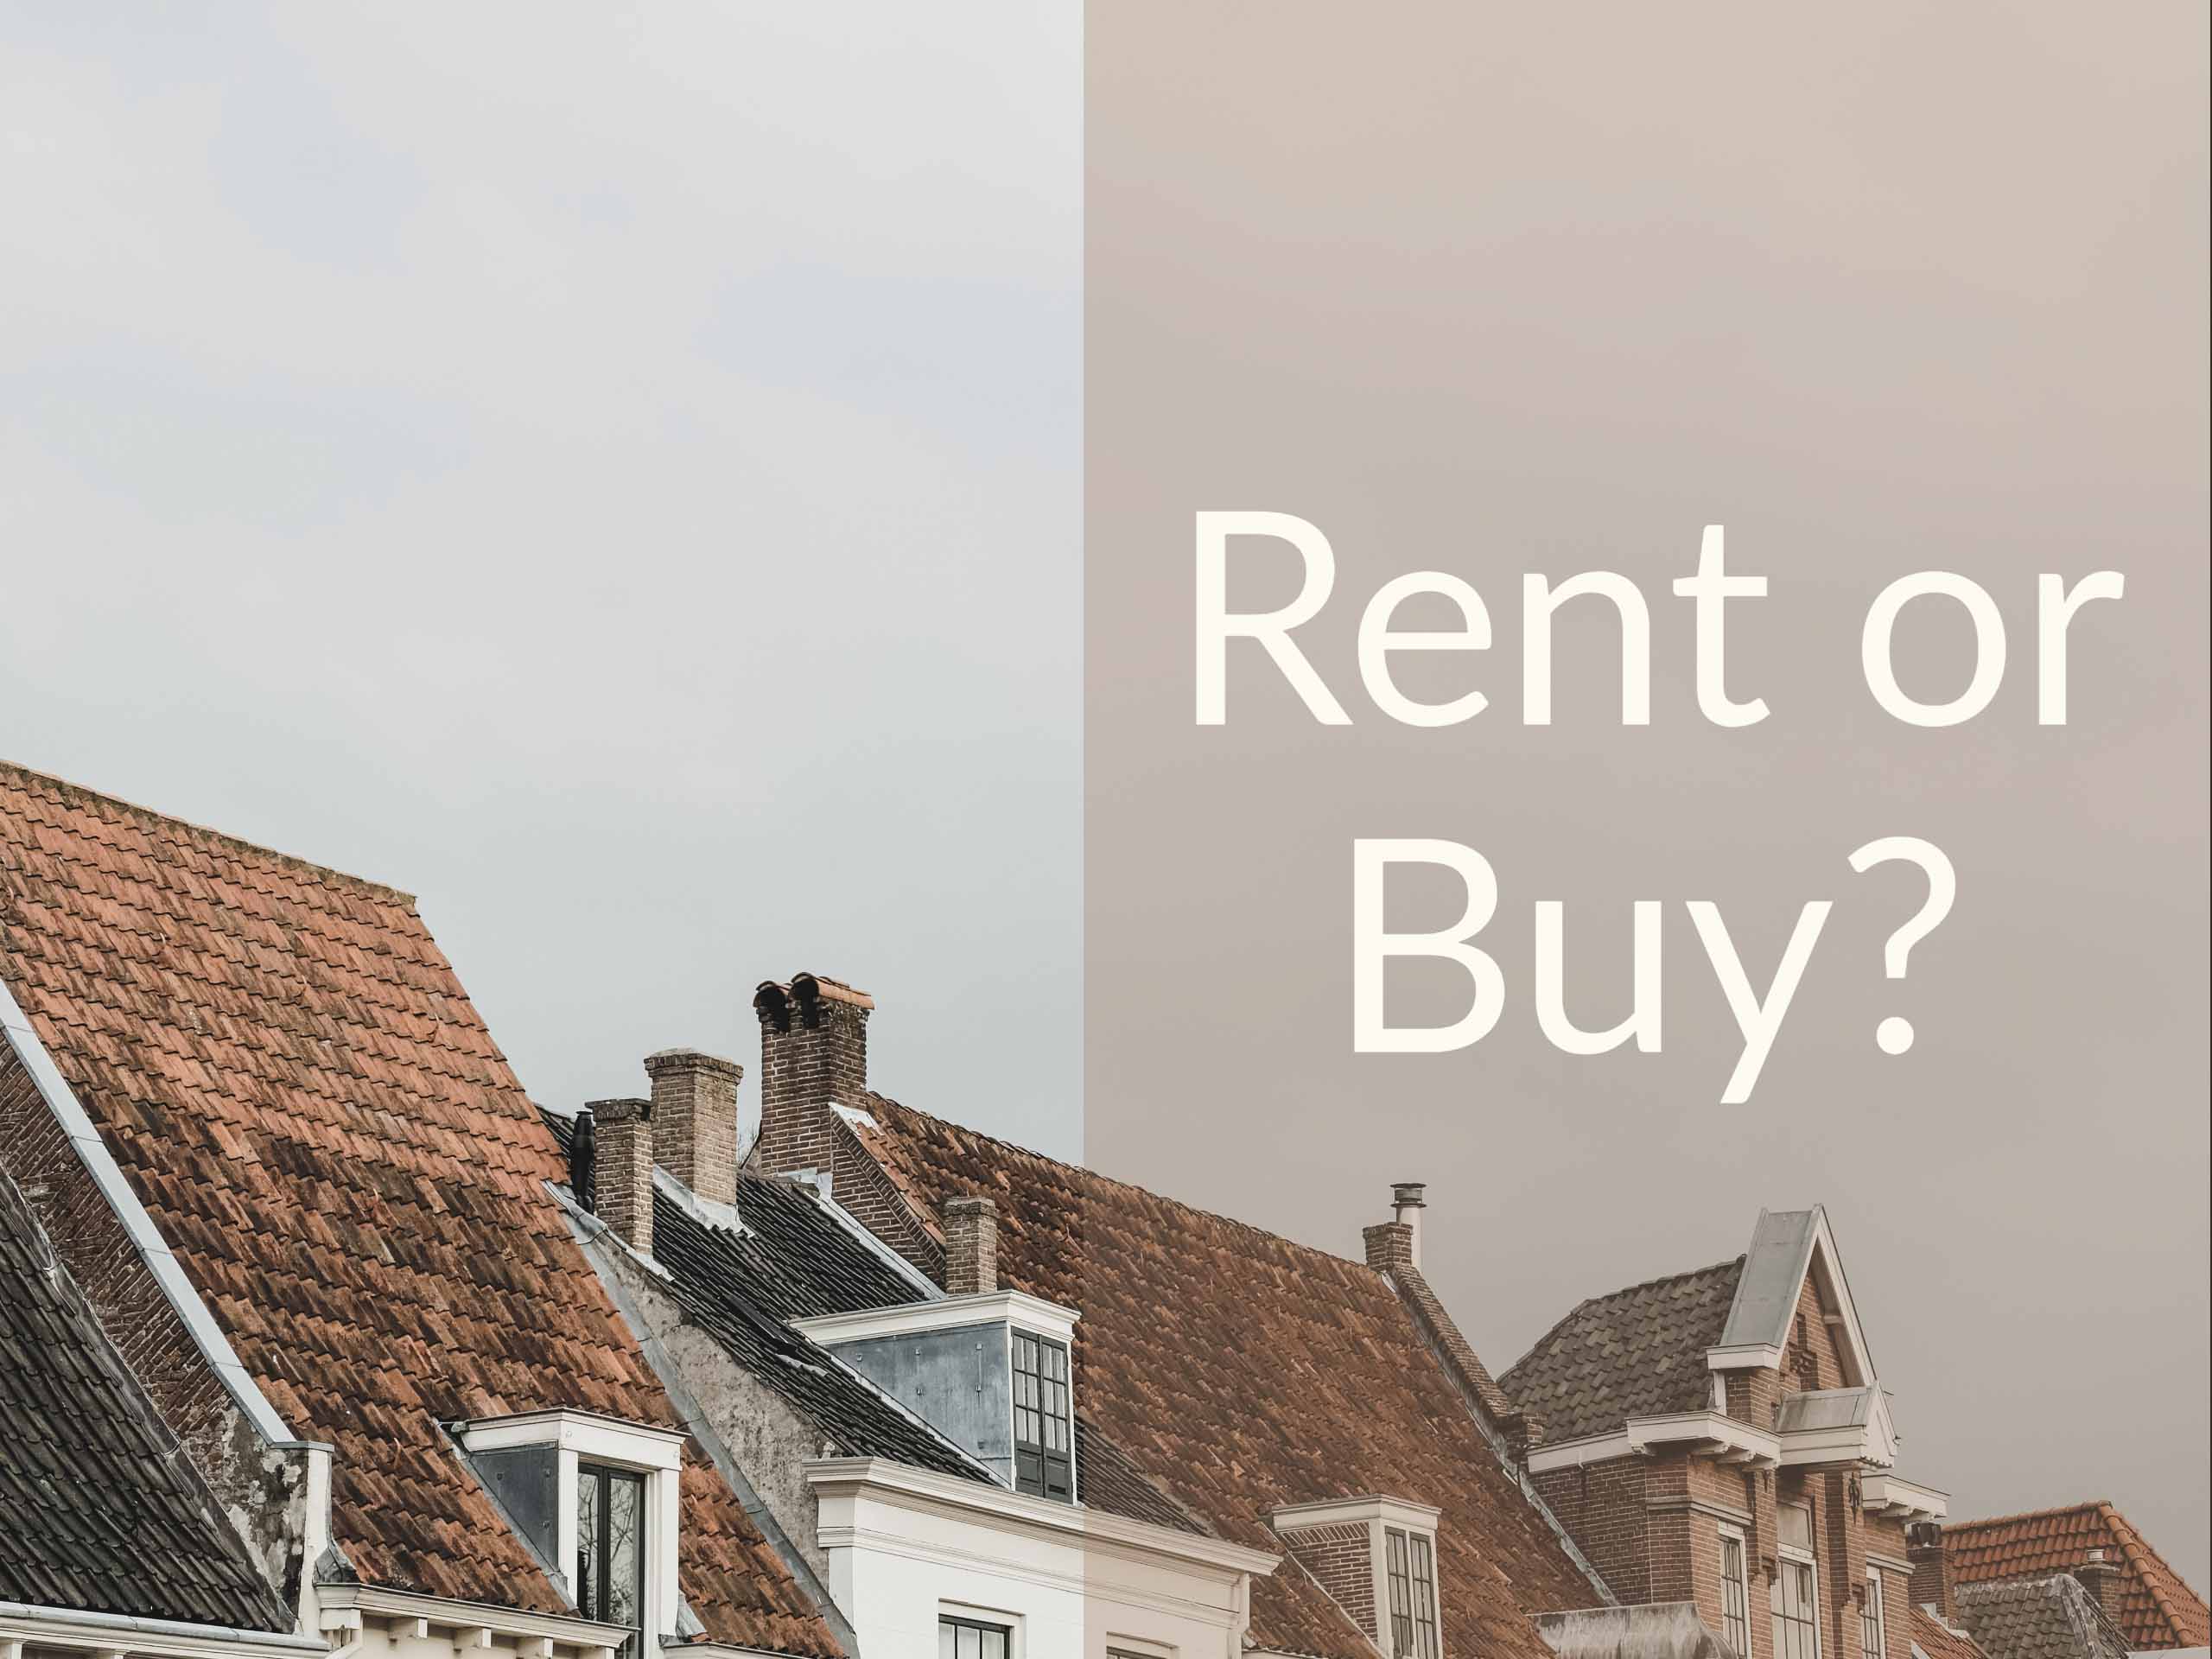 435: Is It Better to Rent or Buy a House?